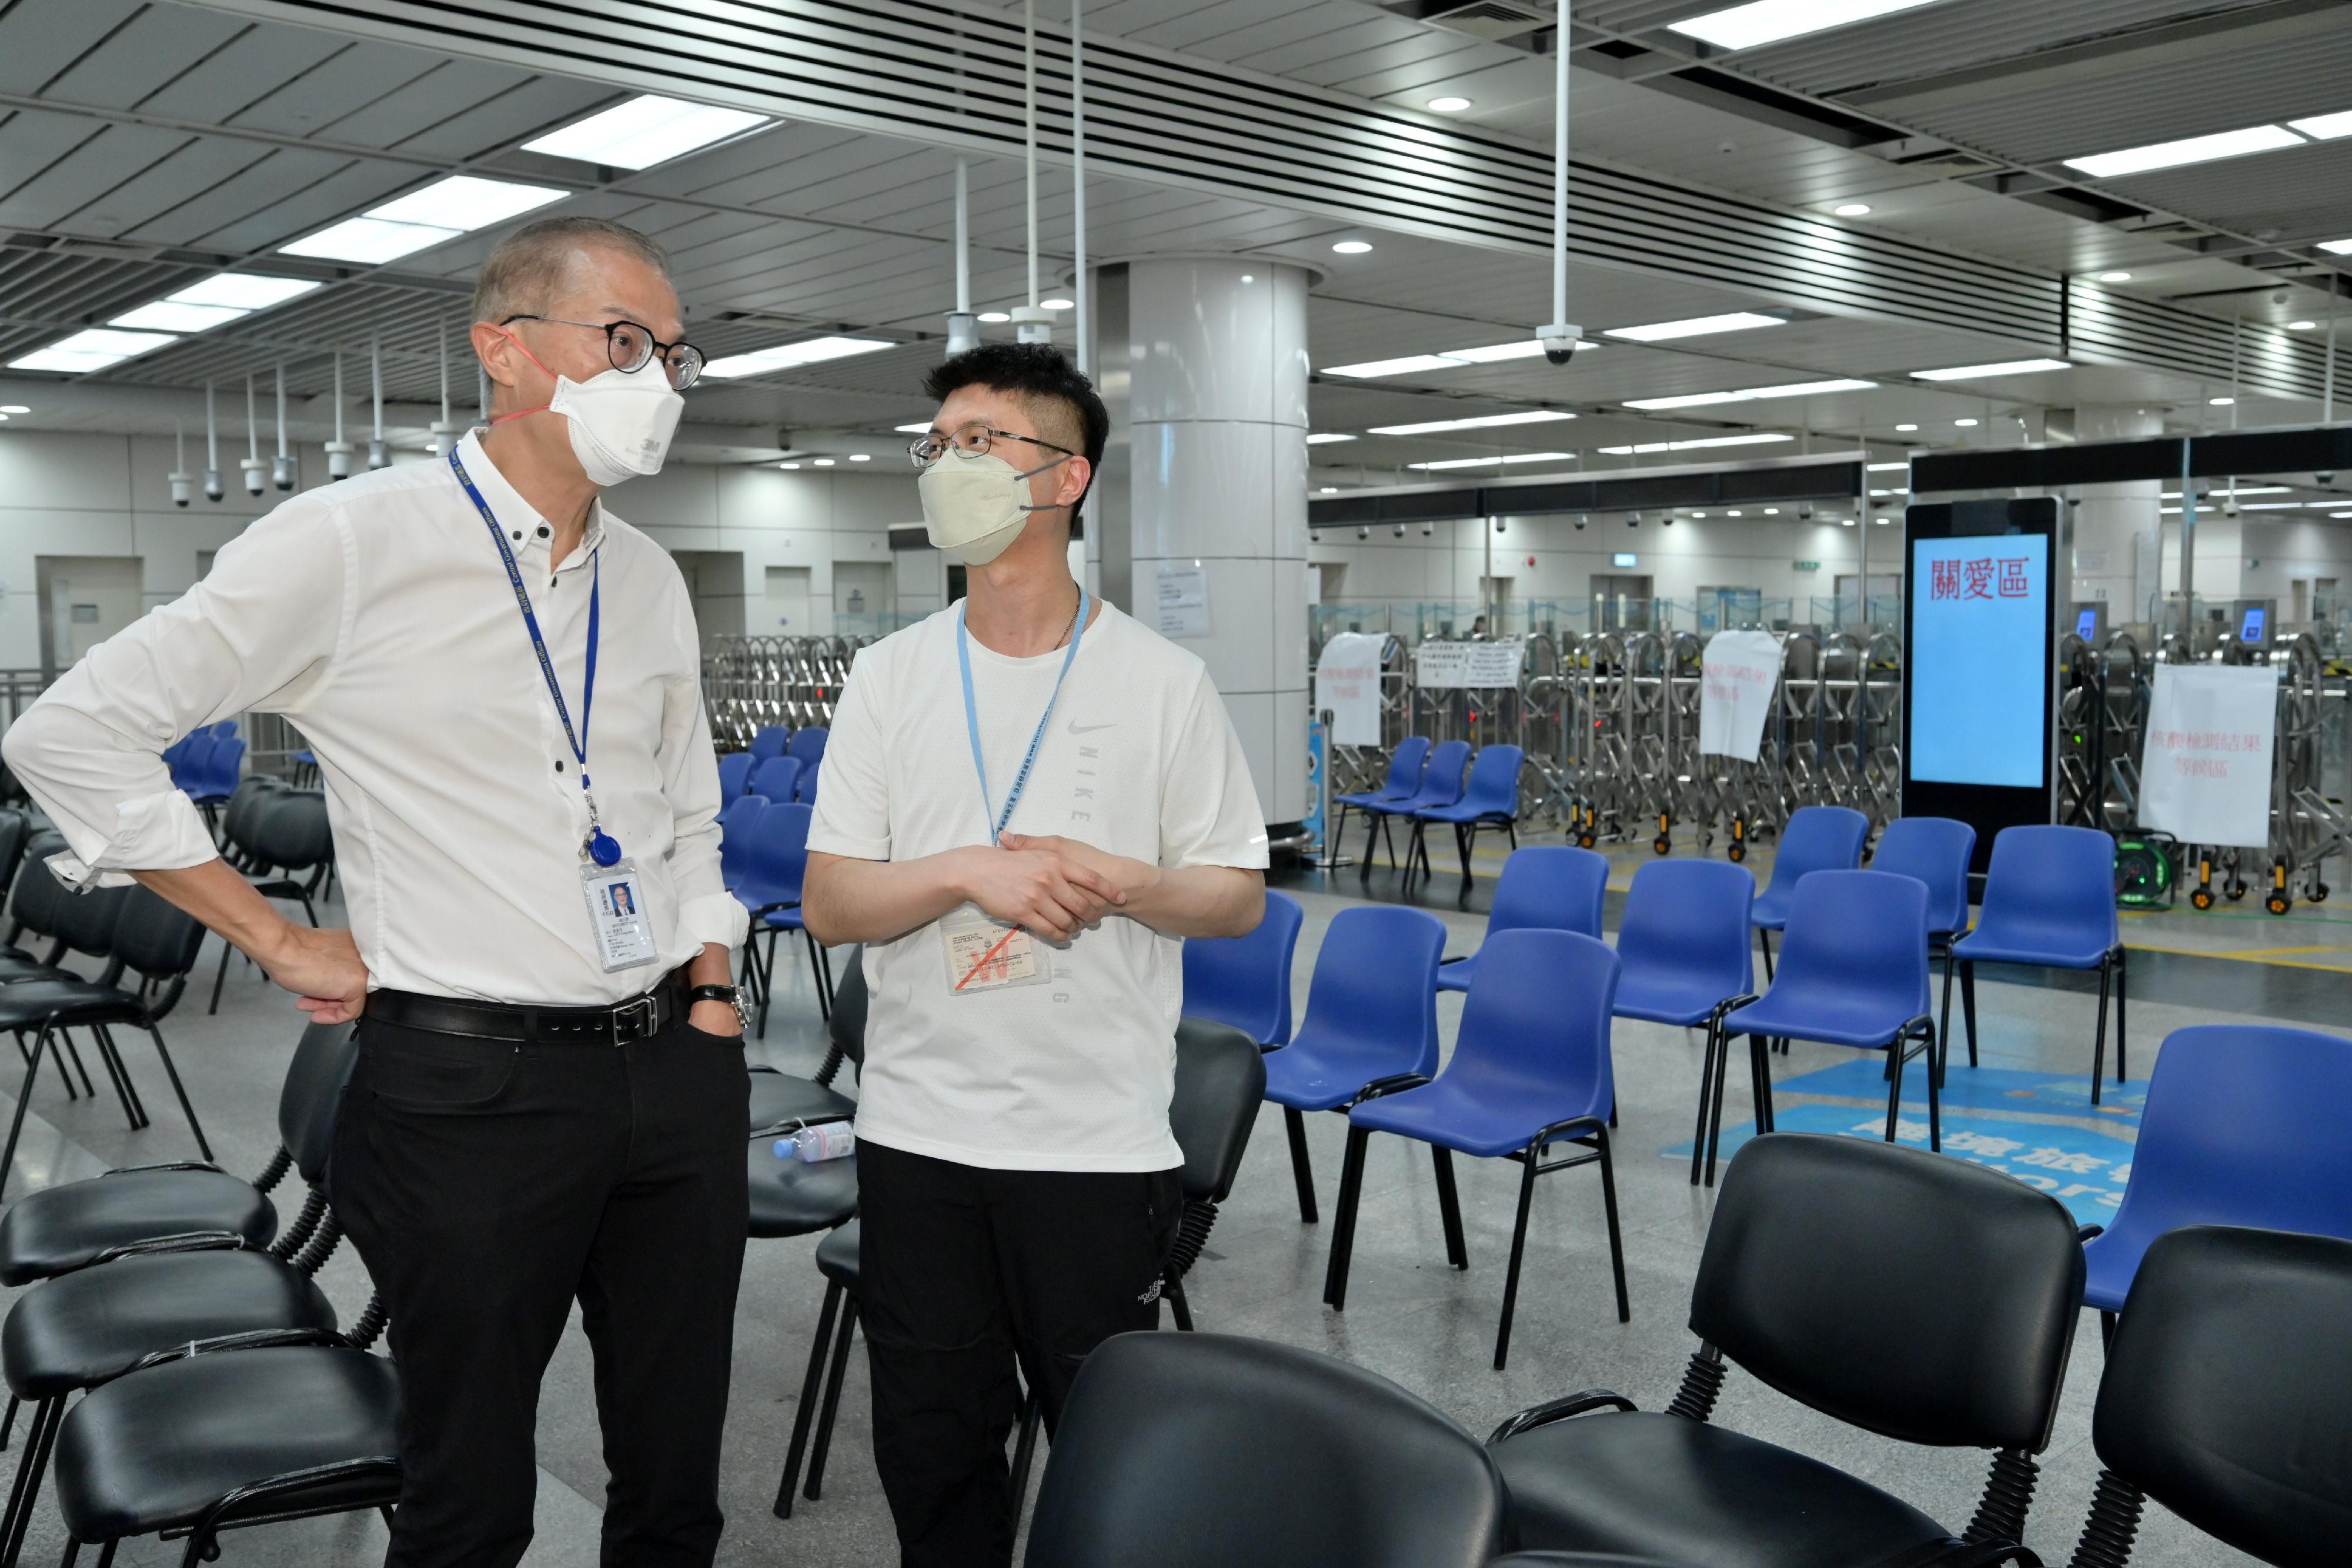 The Secretary for Health, Professor Lo Chung-mau (left), today (July 10) receives briefing by the Chief Port Health Officer of the Centre for Health Protection of the Department of Health, Dr Leung Yiu-hong (right), on the workflow for special nucleic acid testing before departure at the Shenzhen Bay Control Point.